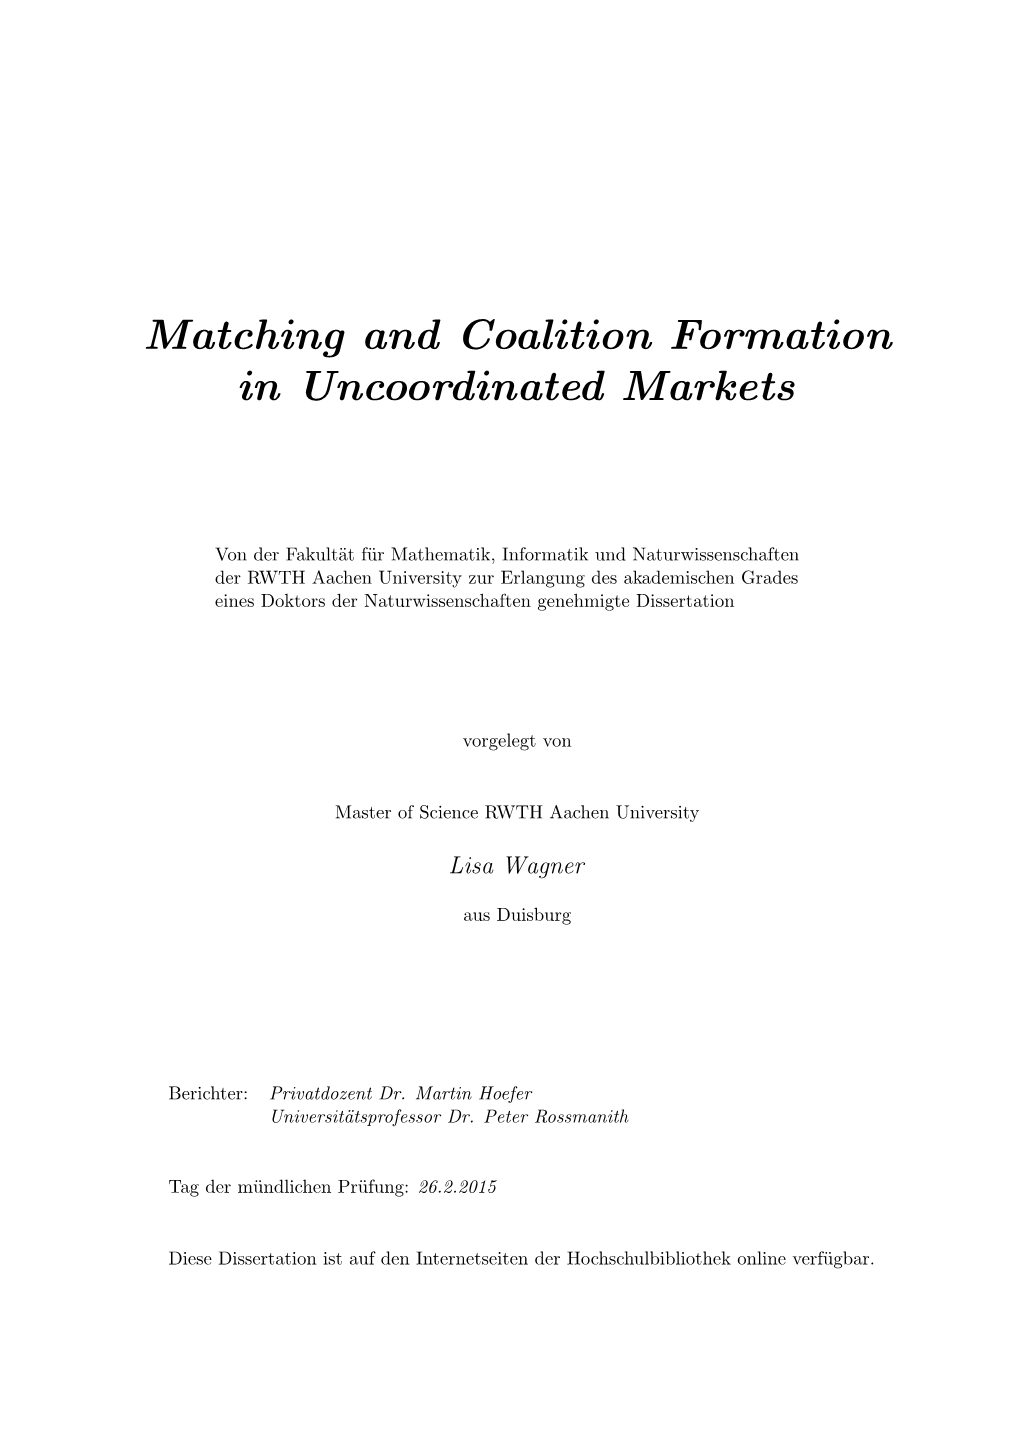 Matching and Coalition Formation in Uncoordinated Markets